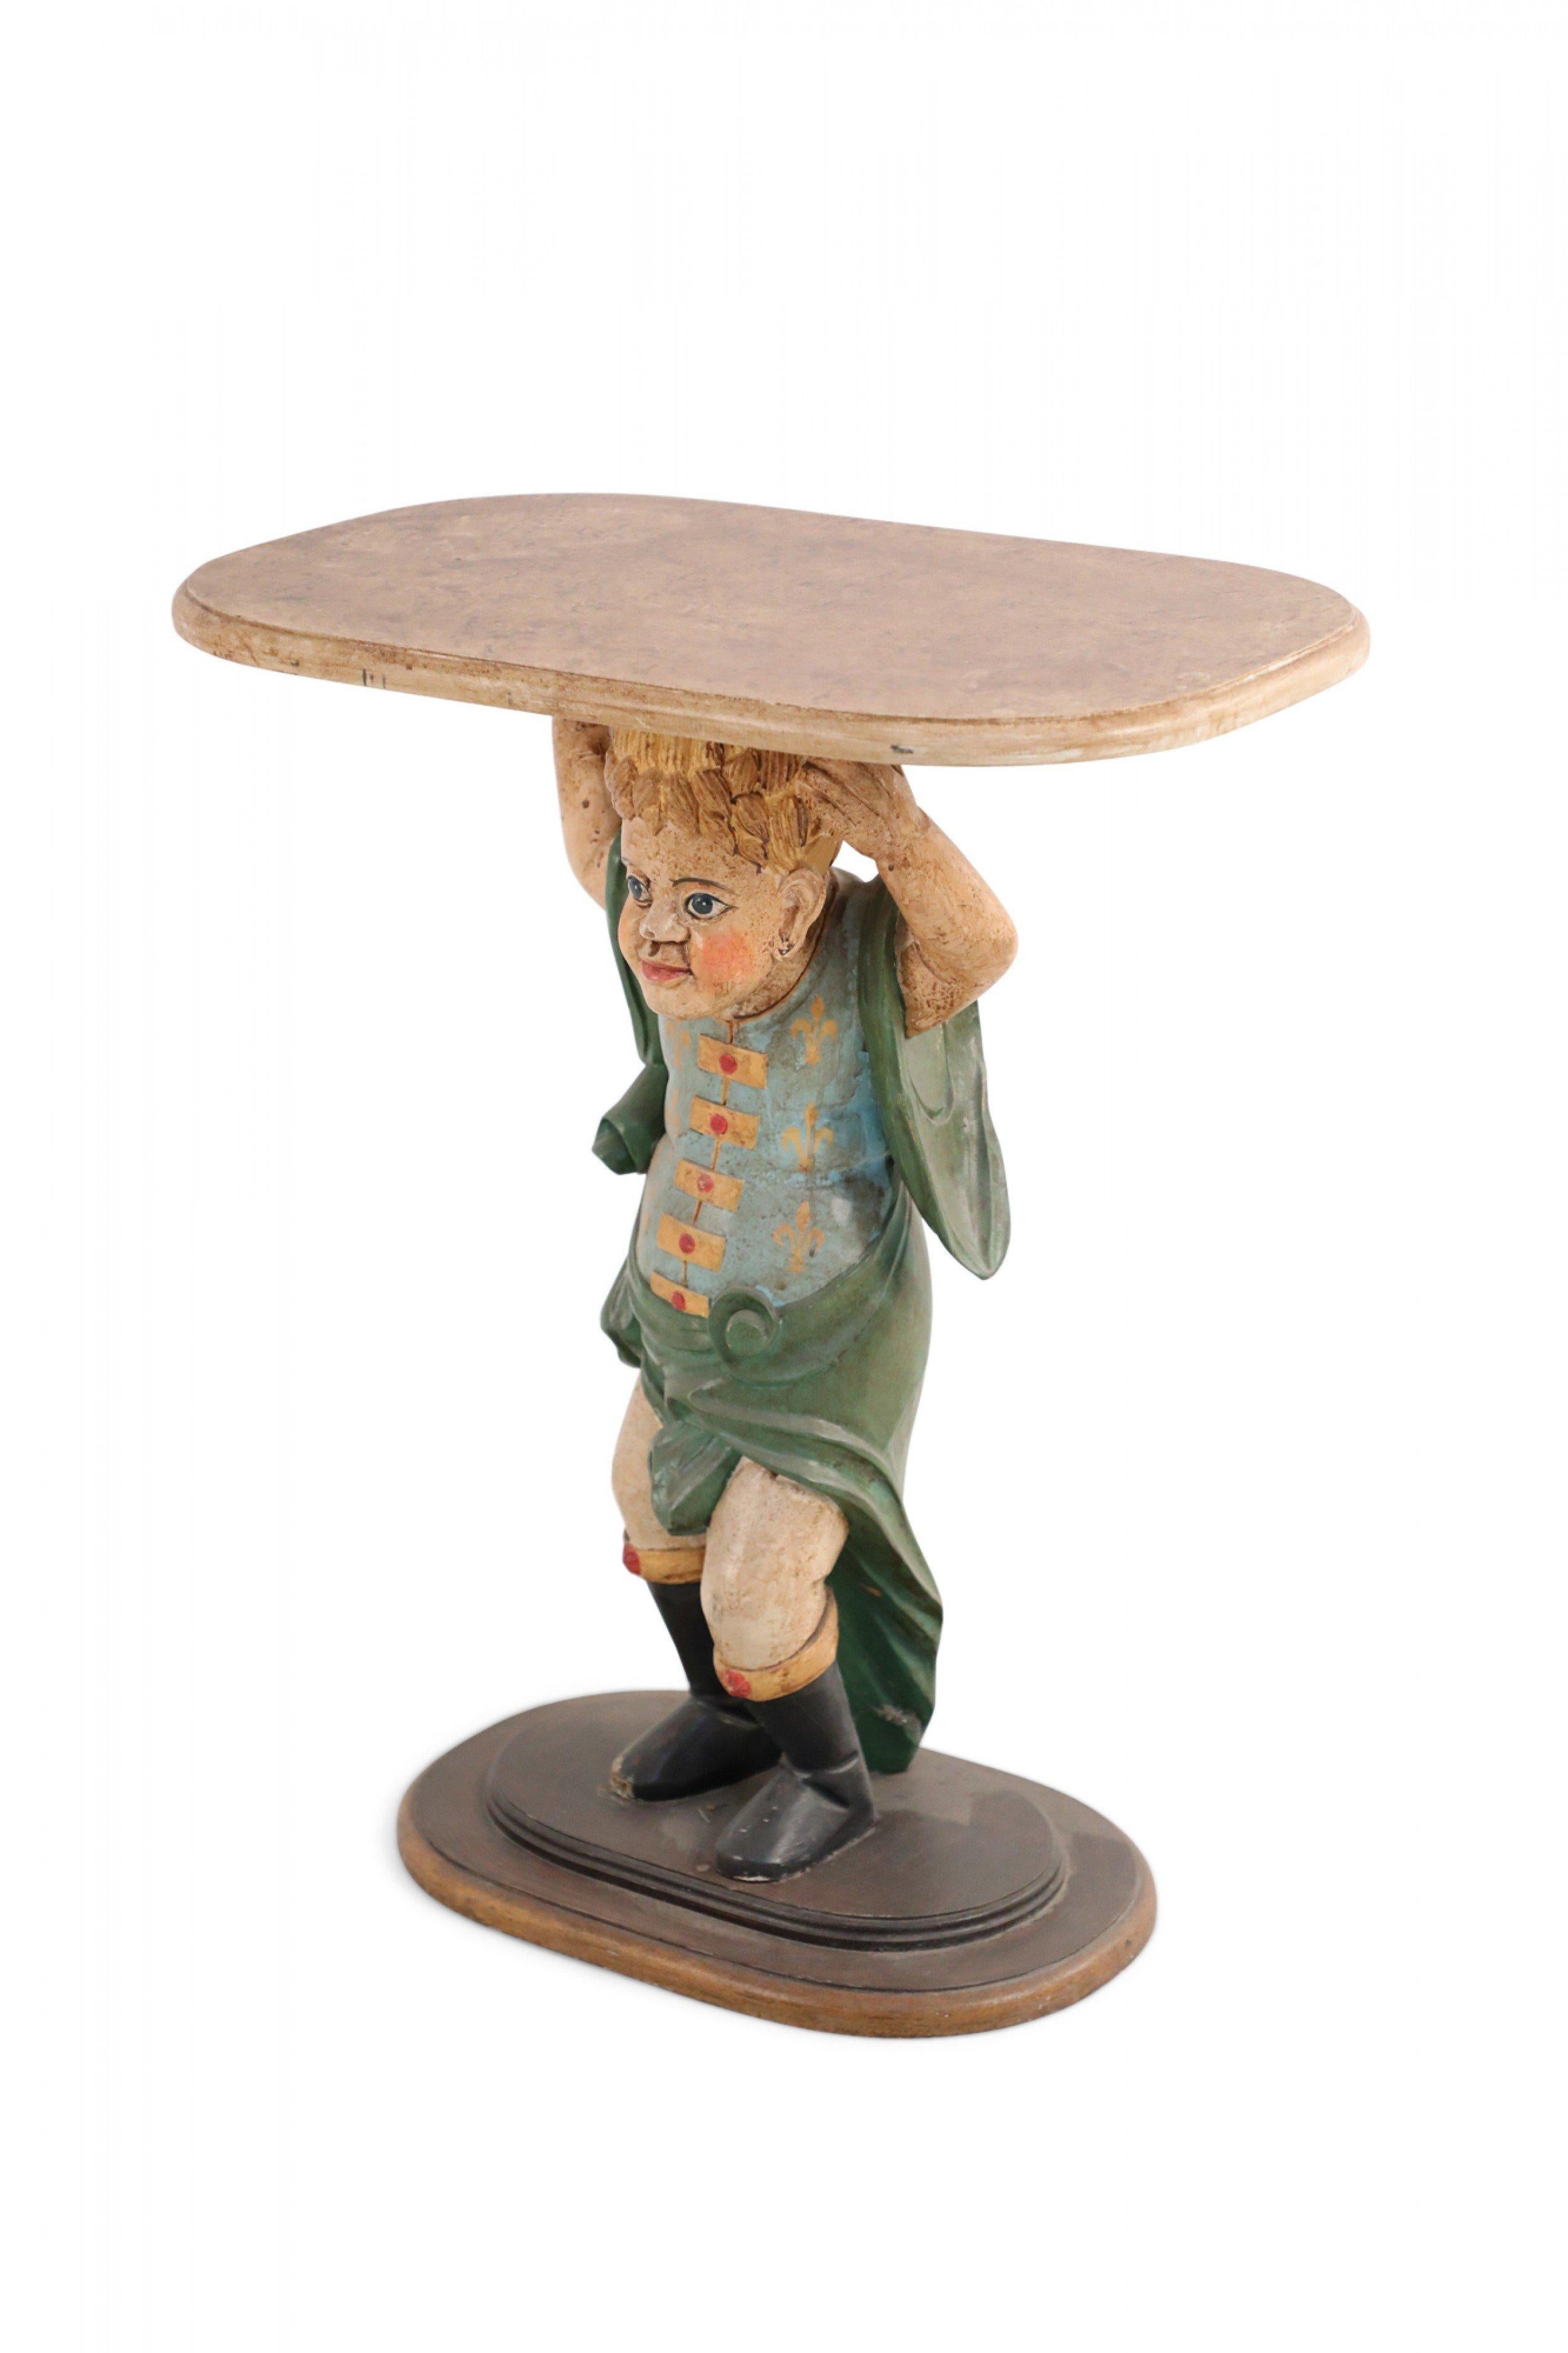 Pair of Italian Venetian-style side tables in polychrome carved wood comprised of figurative statues affixed on oval, brown-painted and gilded bases, holding faux marble oval table tops (priced as pair).
       